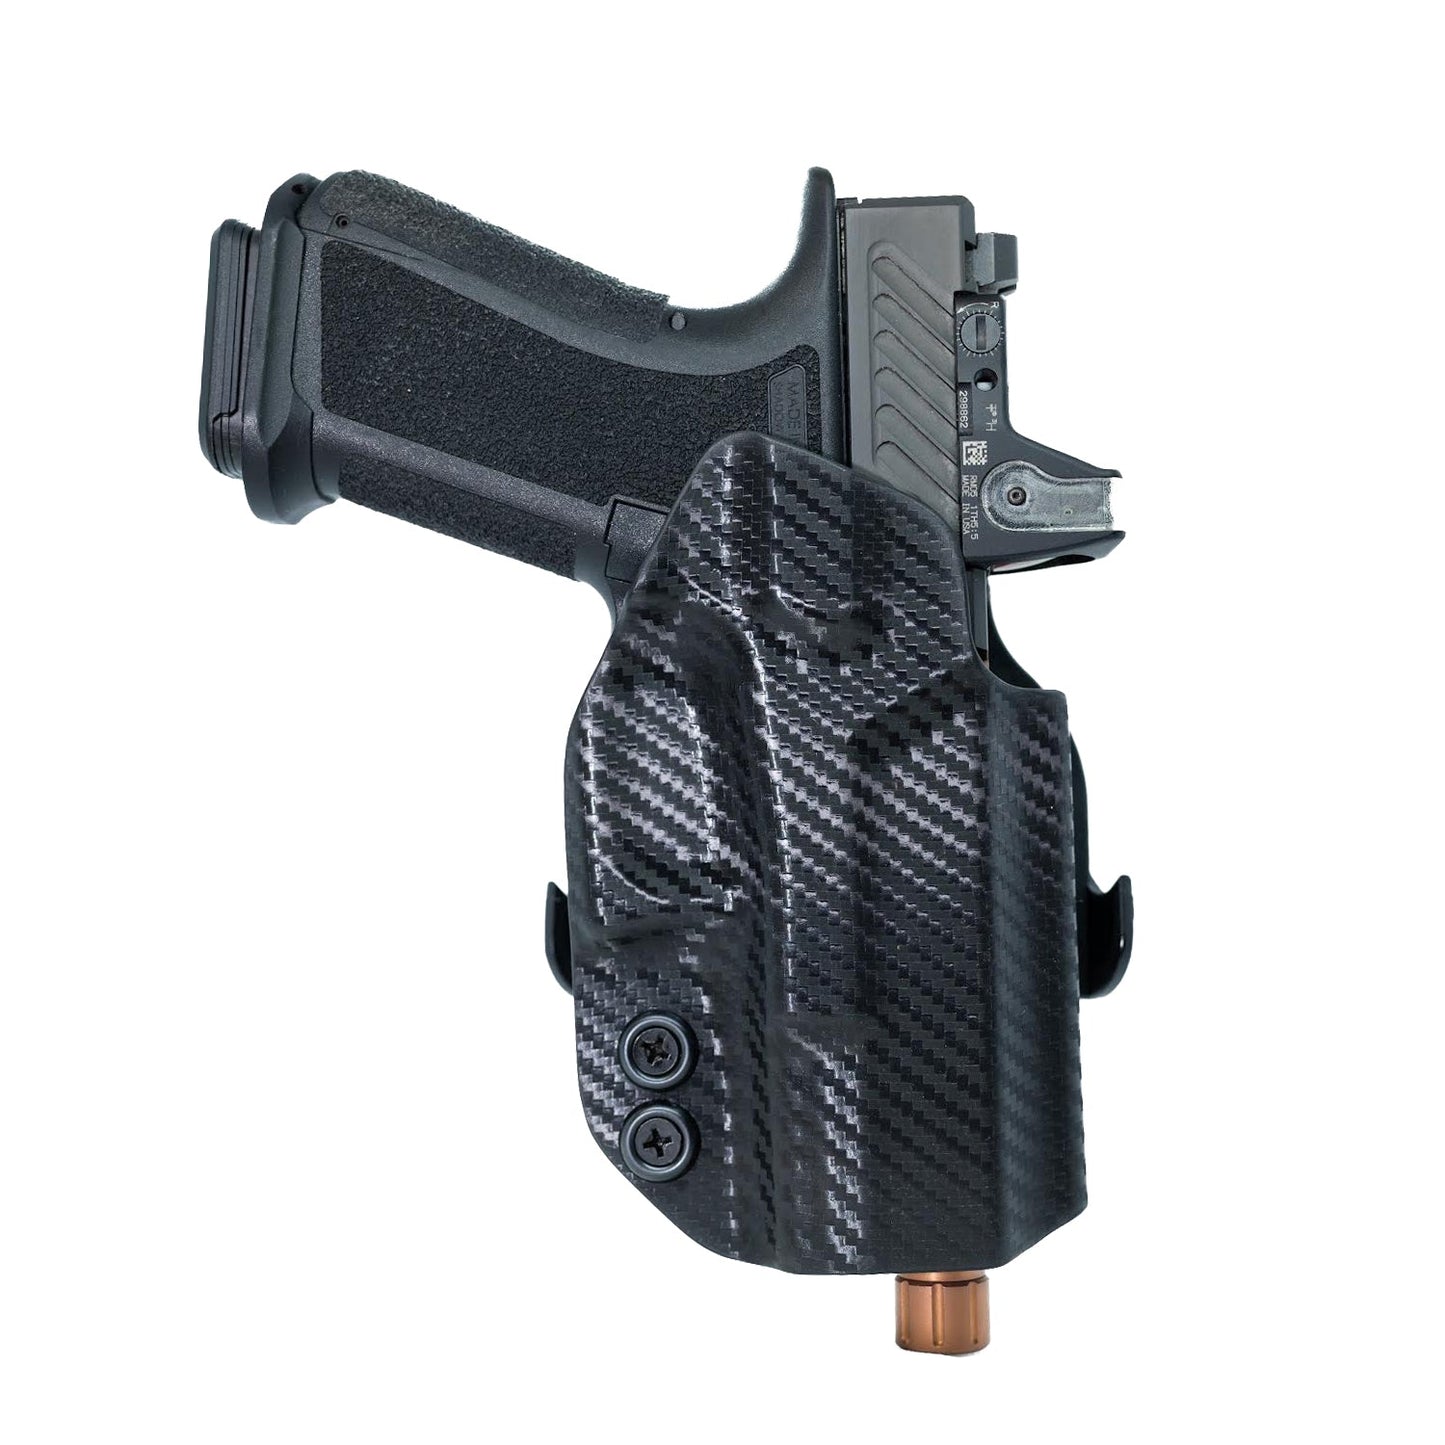 Ruger American Compact 9MM OWB (Outside The Waistband Holster)